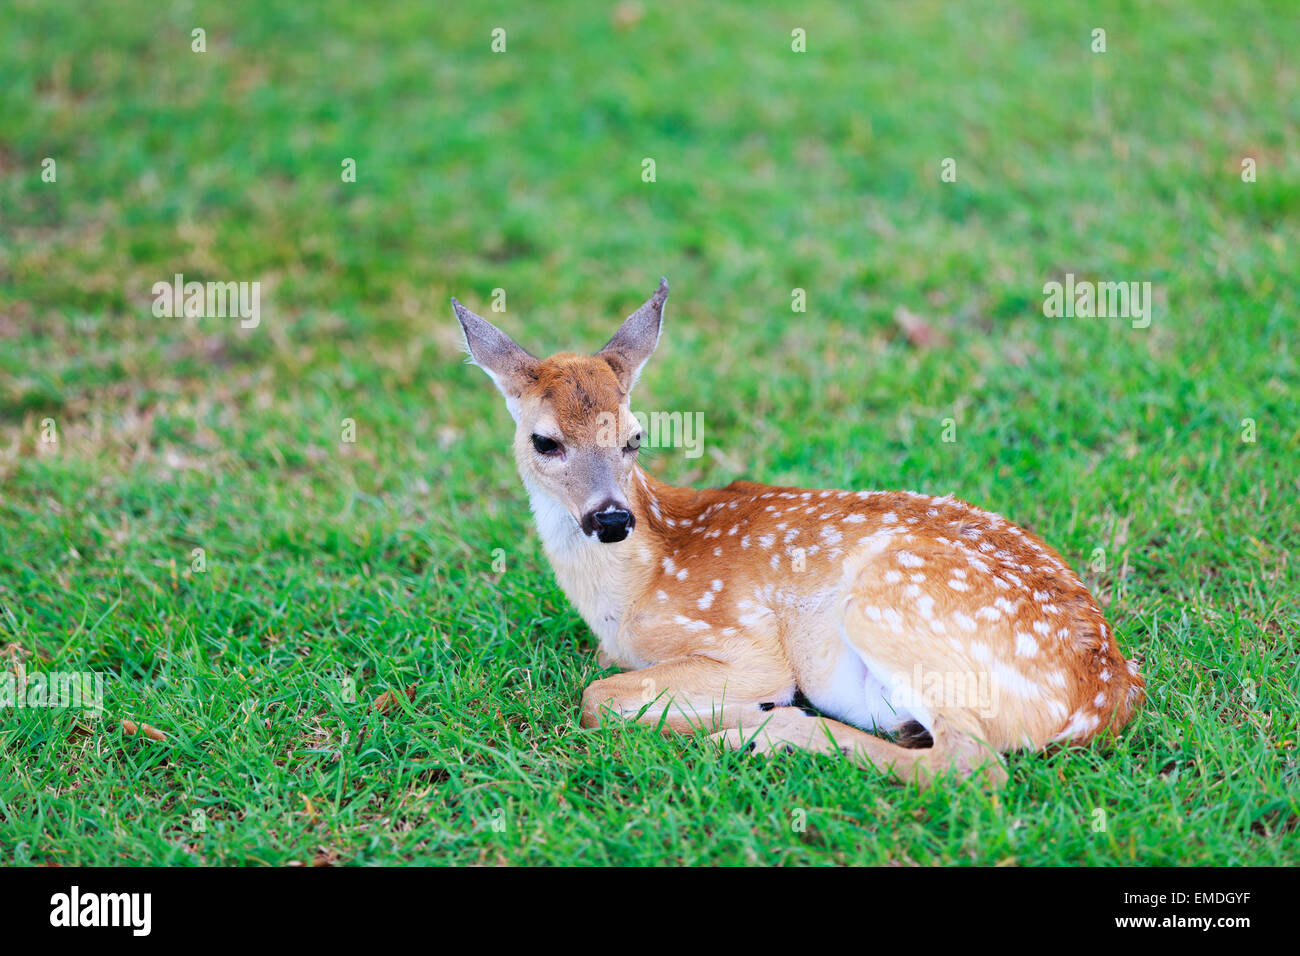 Deer fawn on grass Banque D'Images